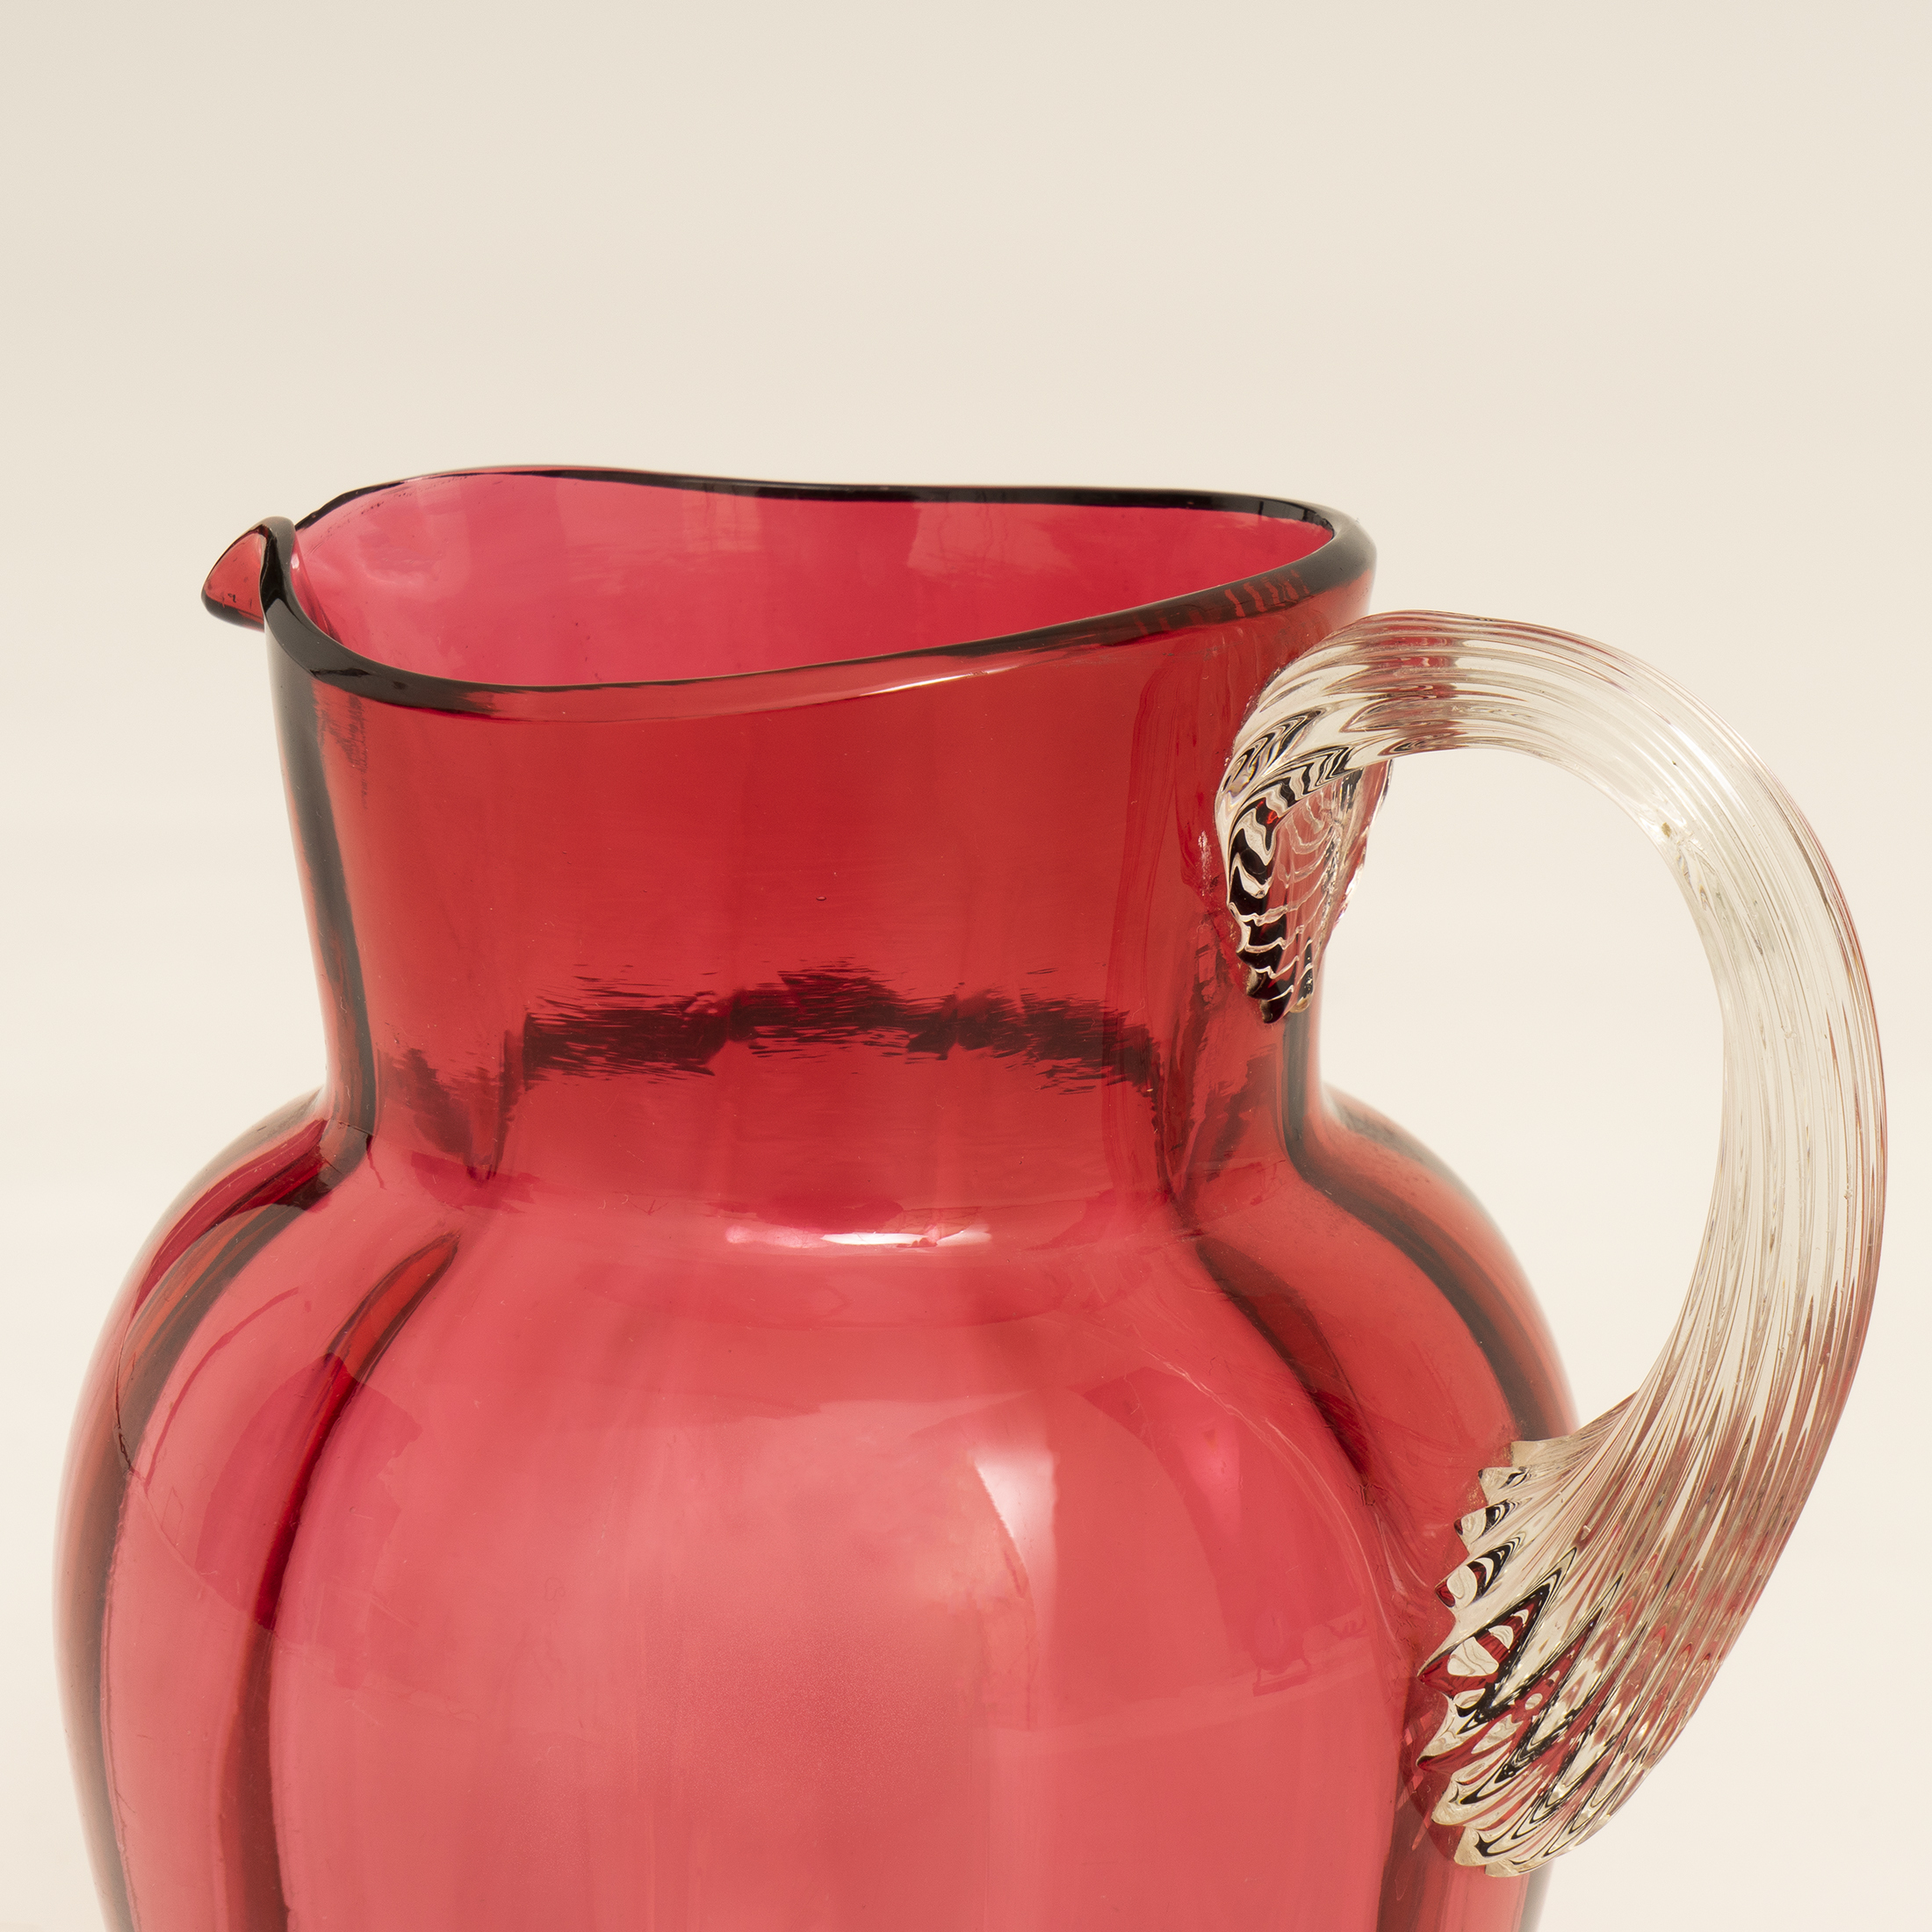 The image for Cranberry Jug 2 0990